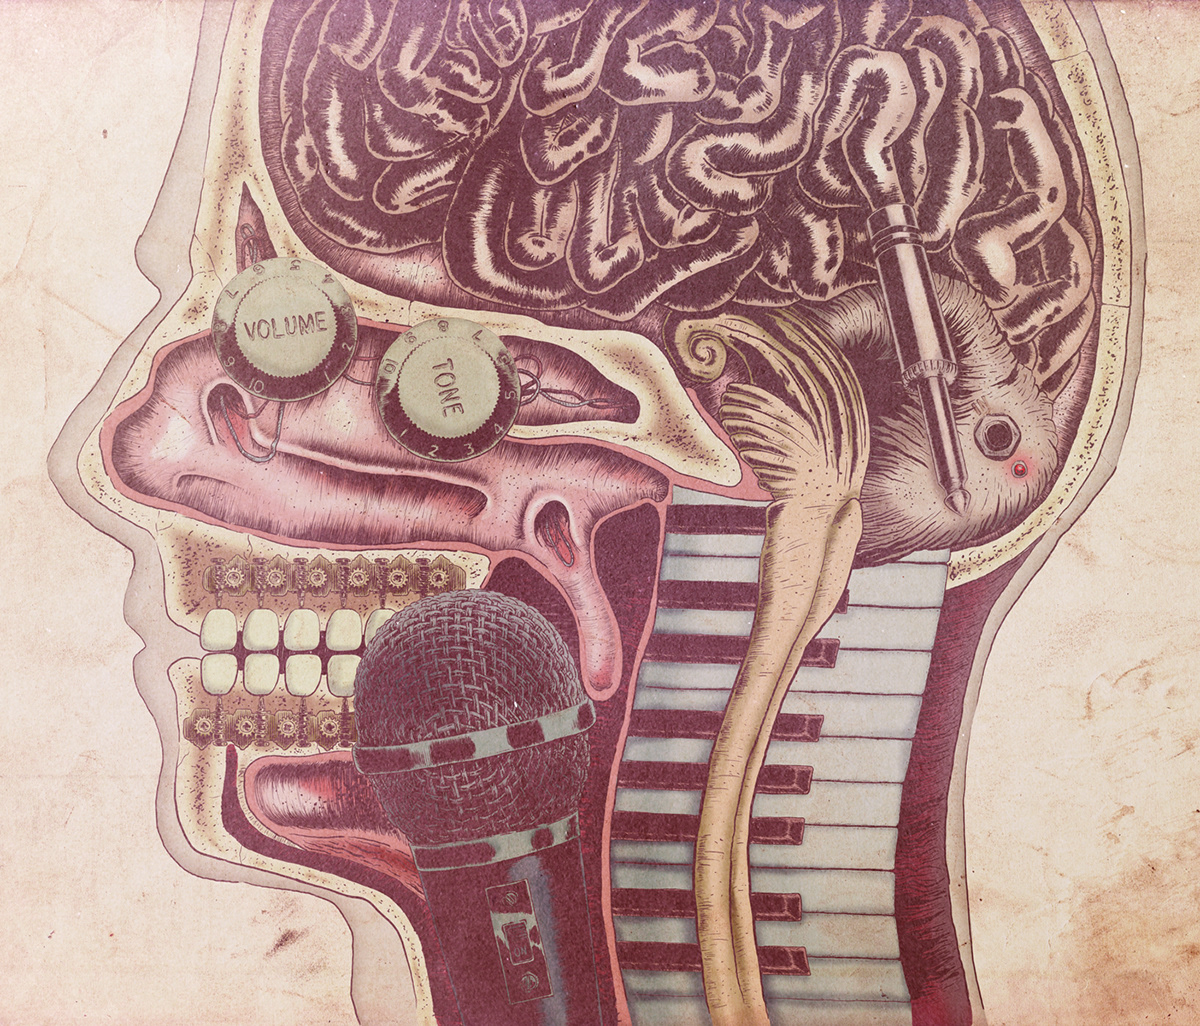 Wires skull biology brain guitar microphone Piano cd paper